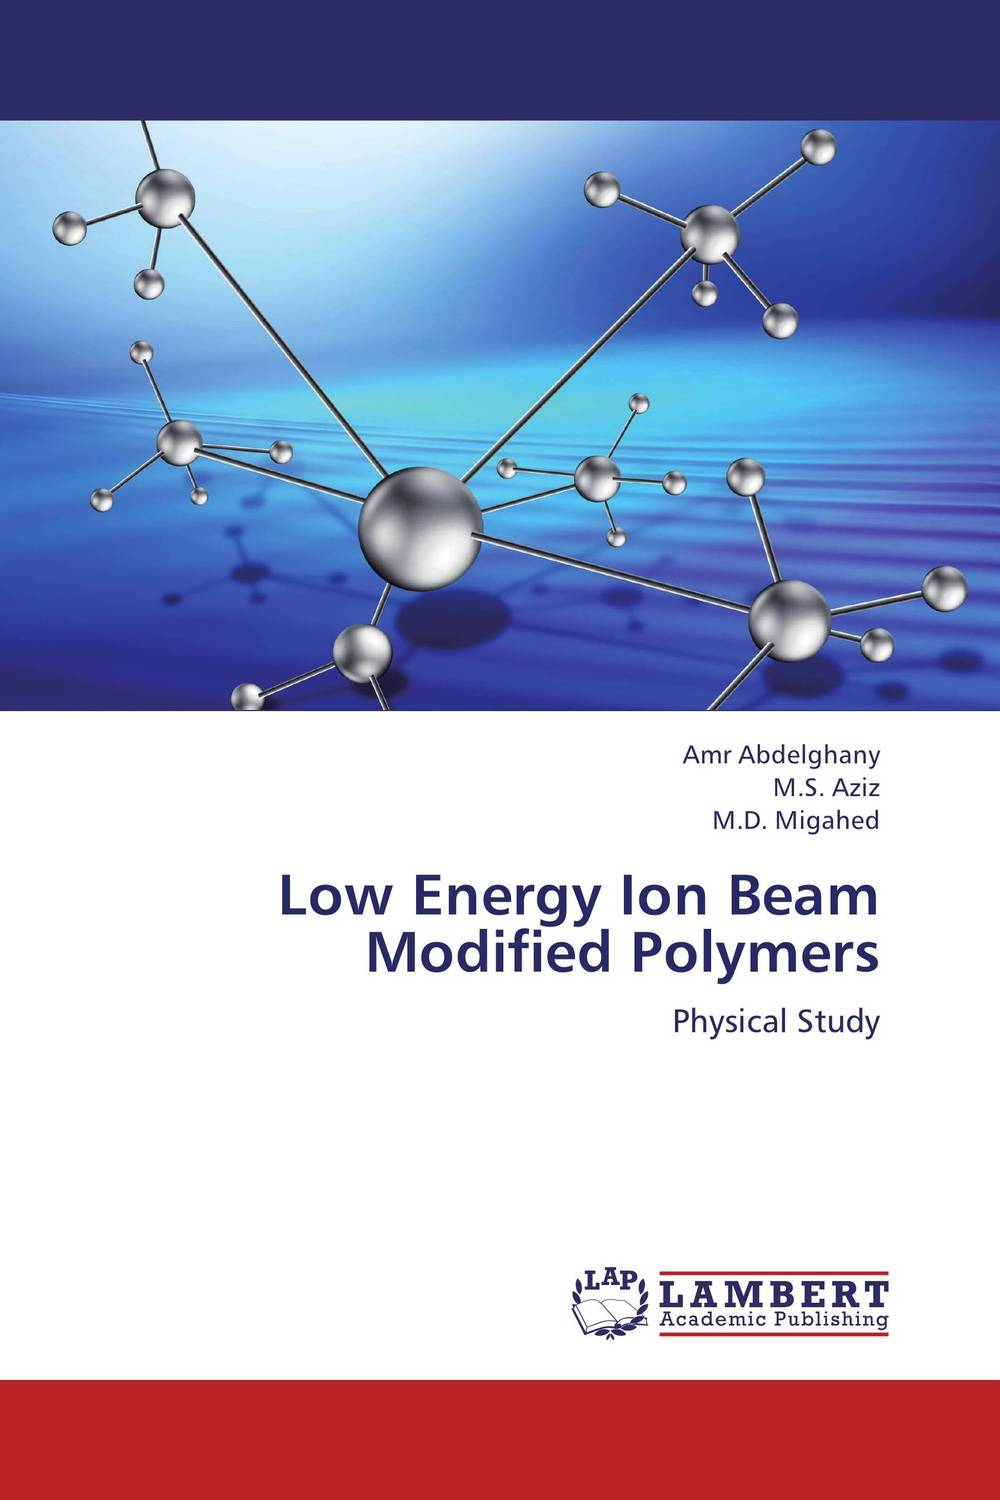 Low Energy Ion Beam Modified Polymers